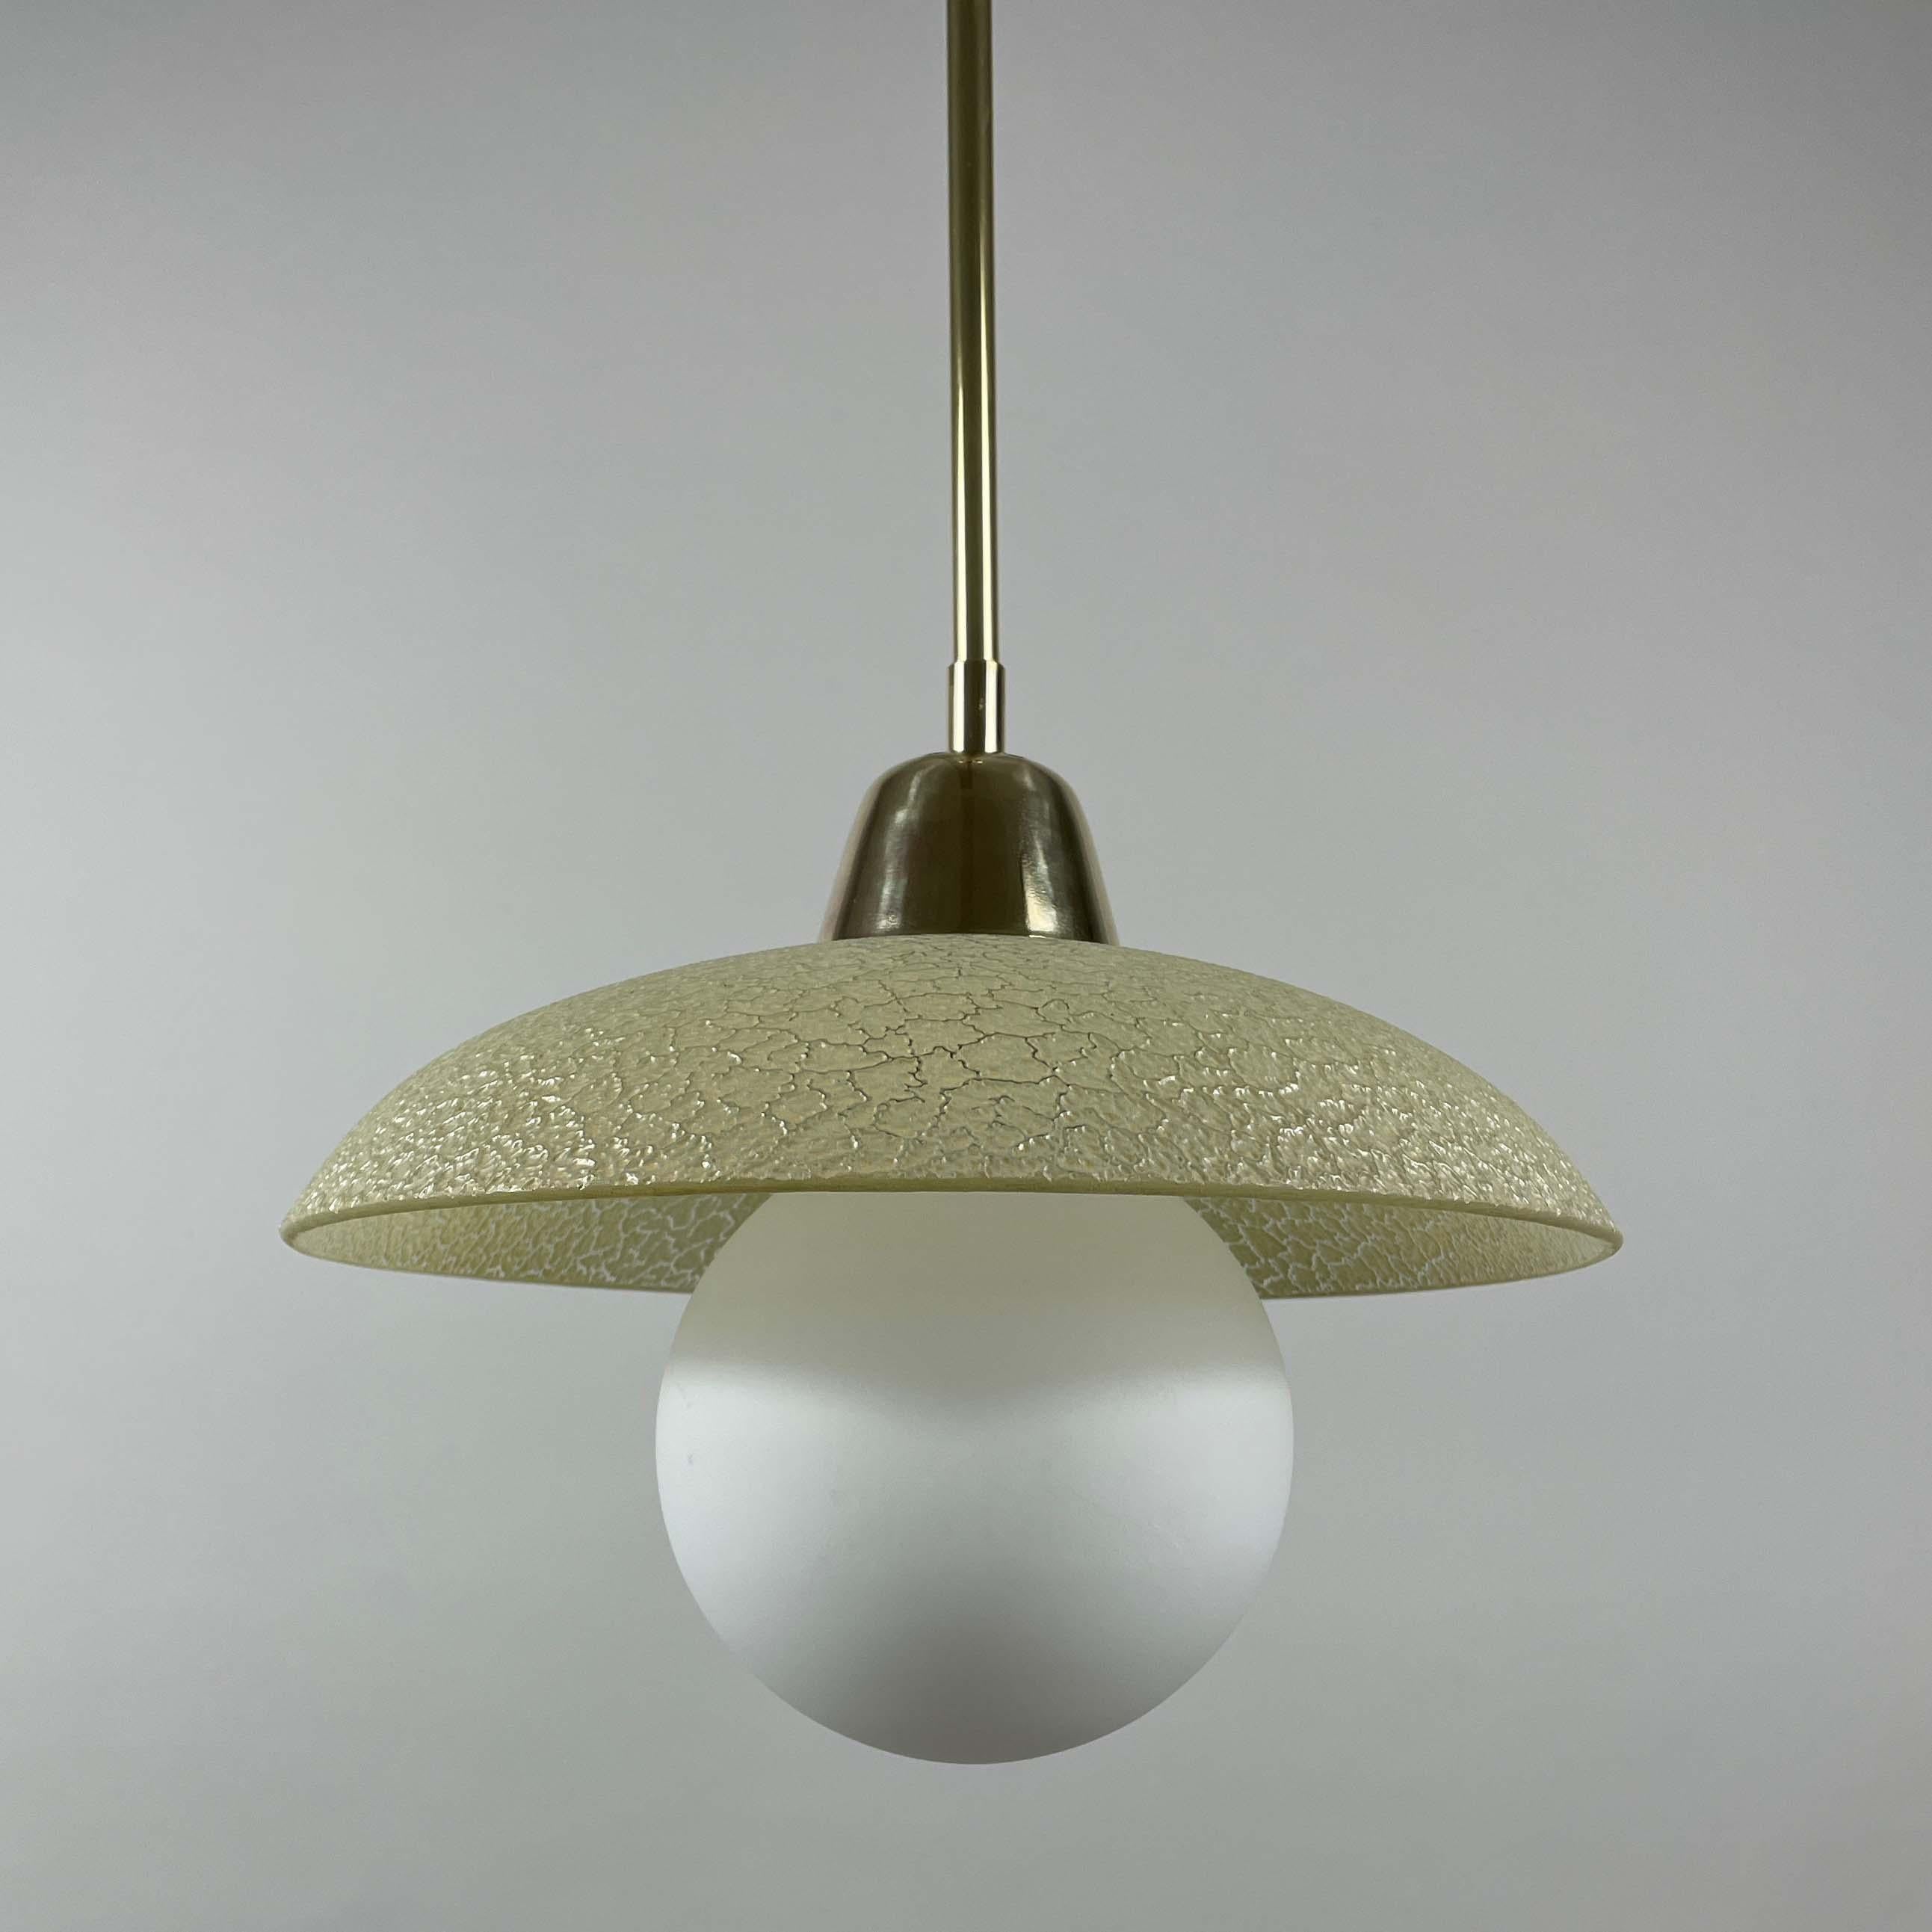 Mid-20th Century Cream Textured Glass and Brass Pendants, Sweden 1940s to 1950s For Sale